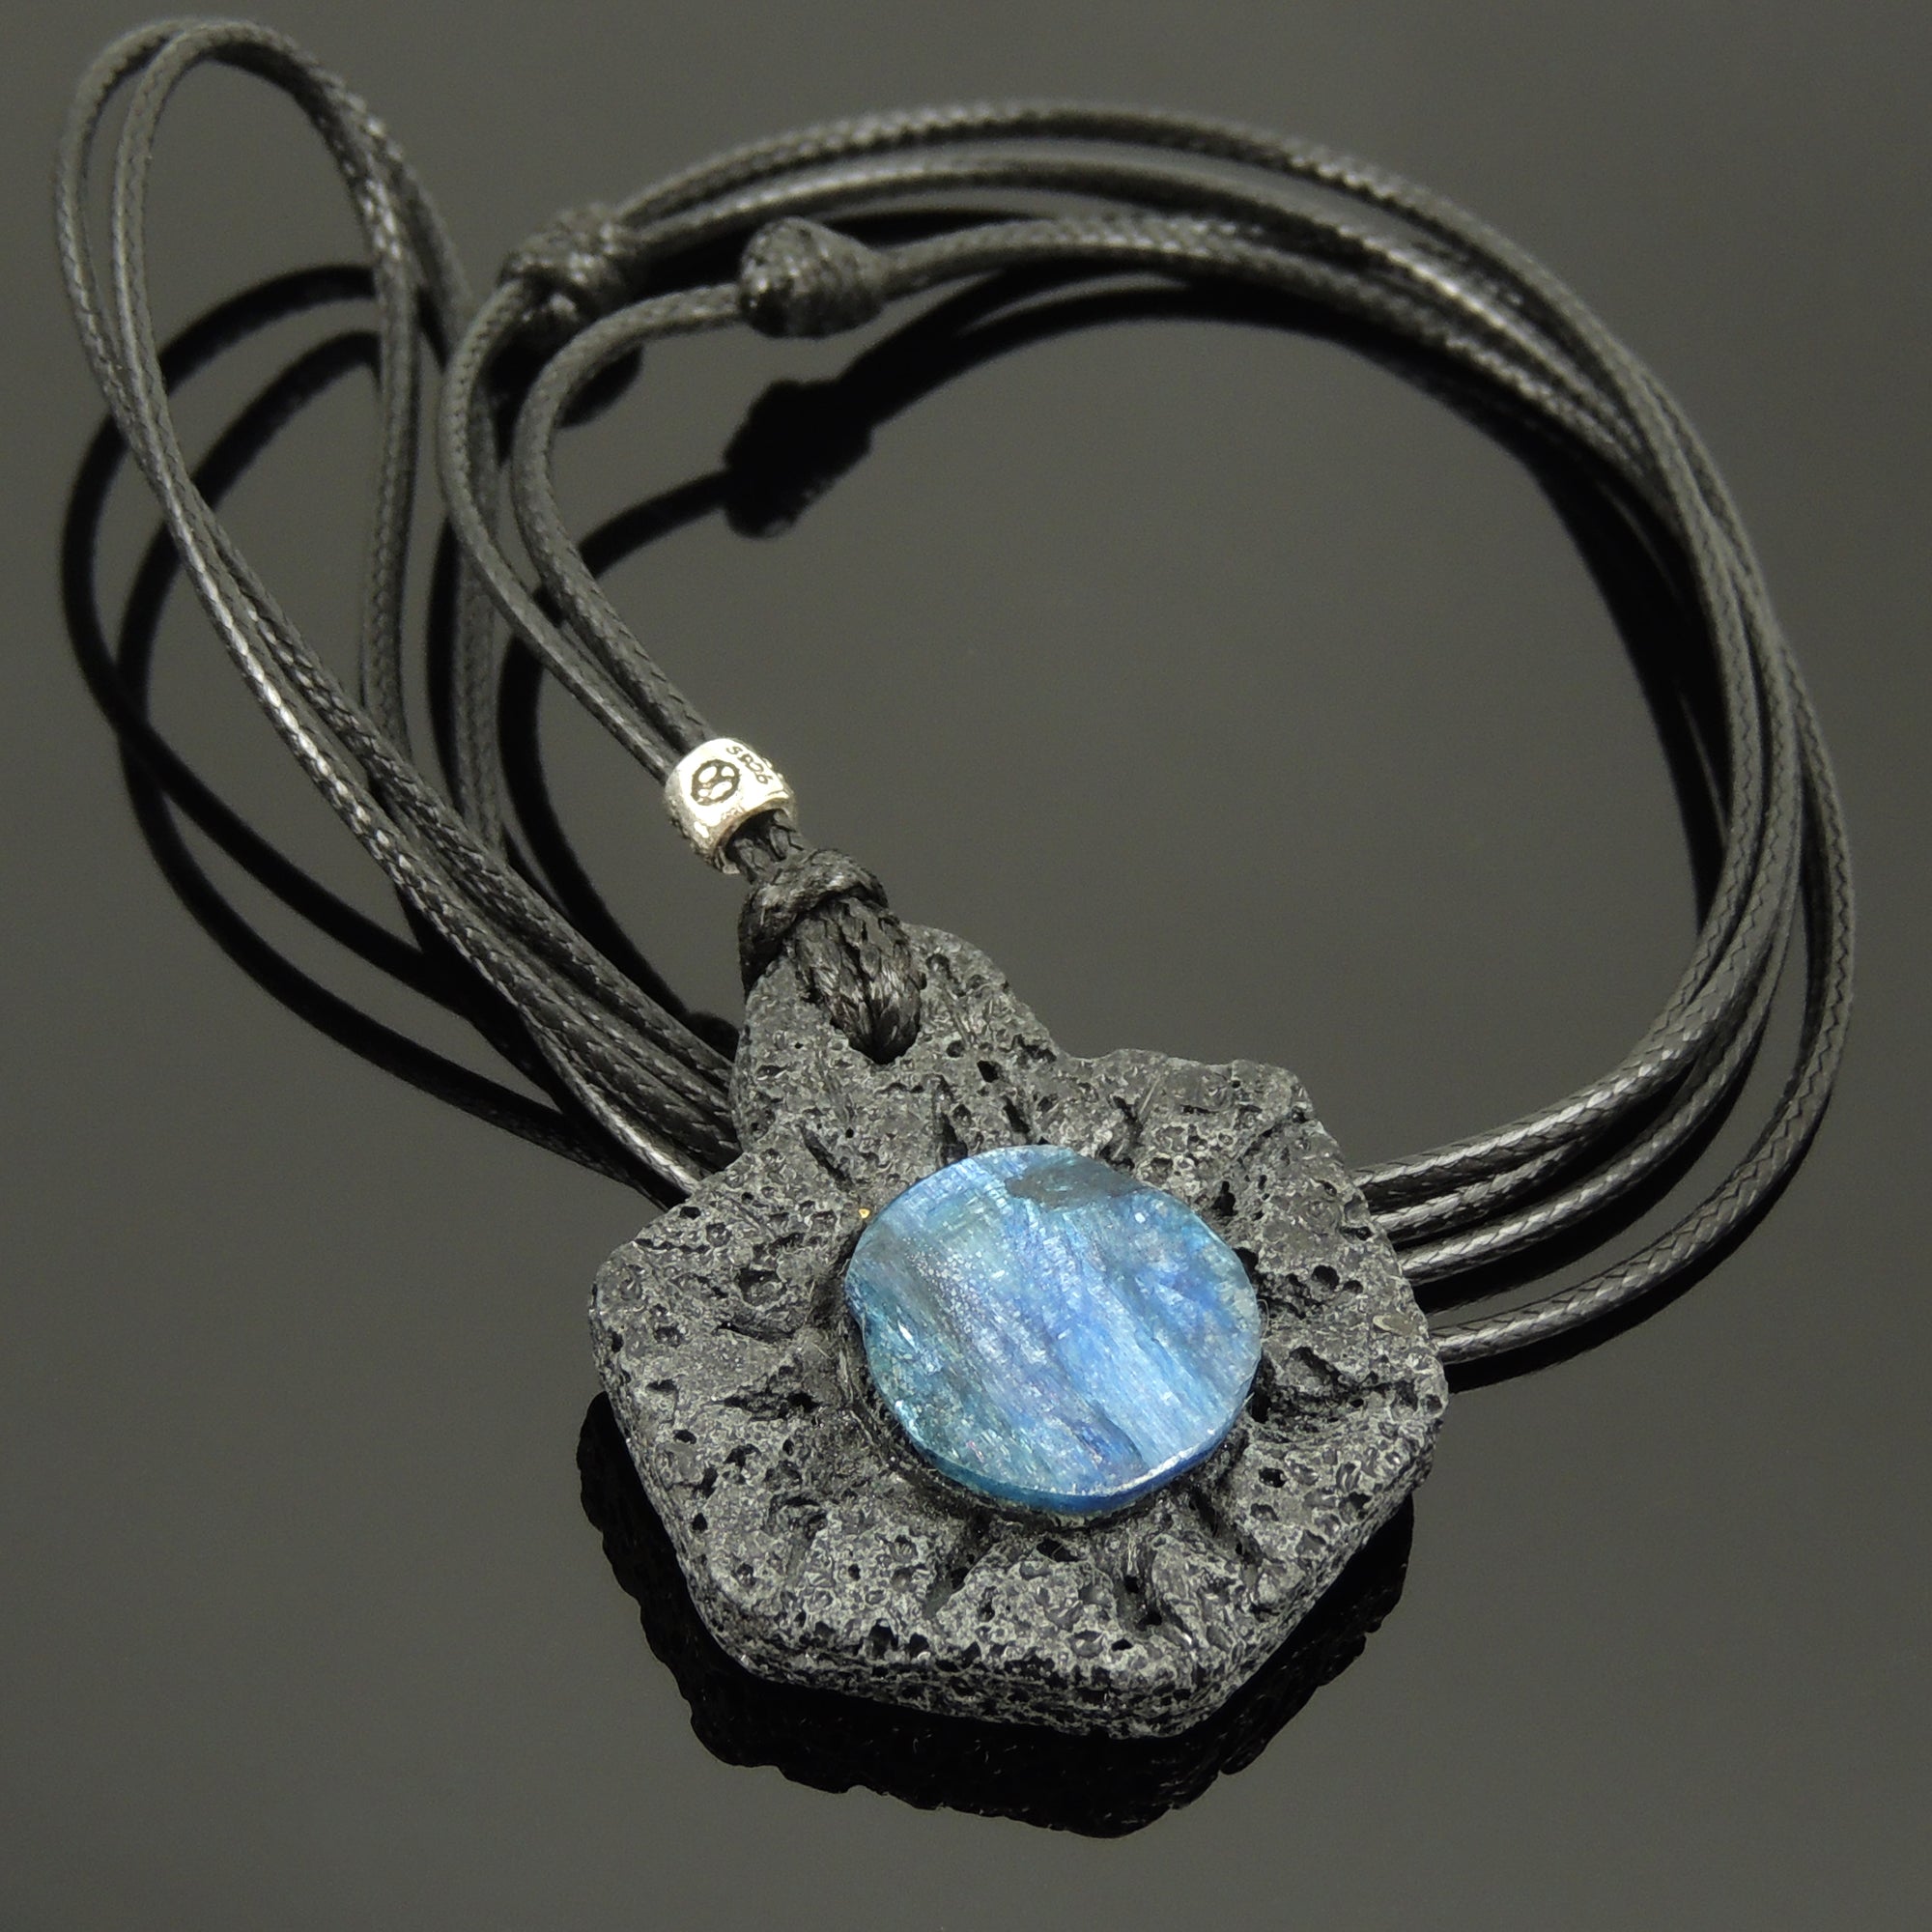 Raw Powerful Blue Kyanite and Lava Rock Pendant Necklace | Amulet for Healing and Balancing Energies - 1st 5th 6th Chakra Healing | Essential Jewelry for Intuition and Communication